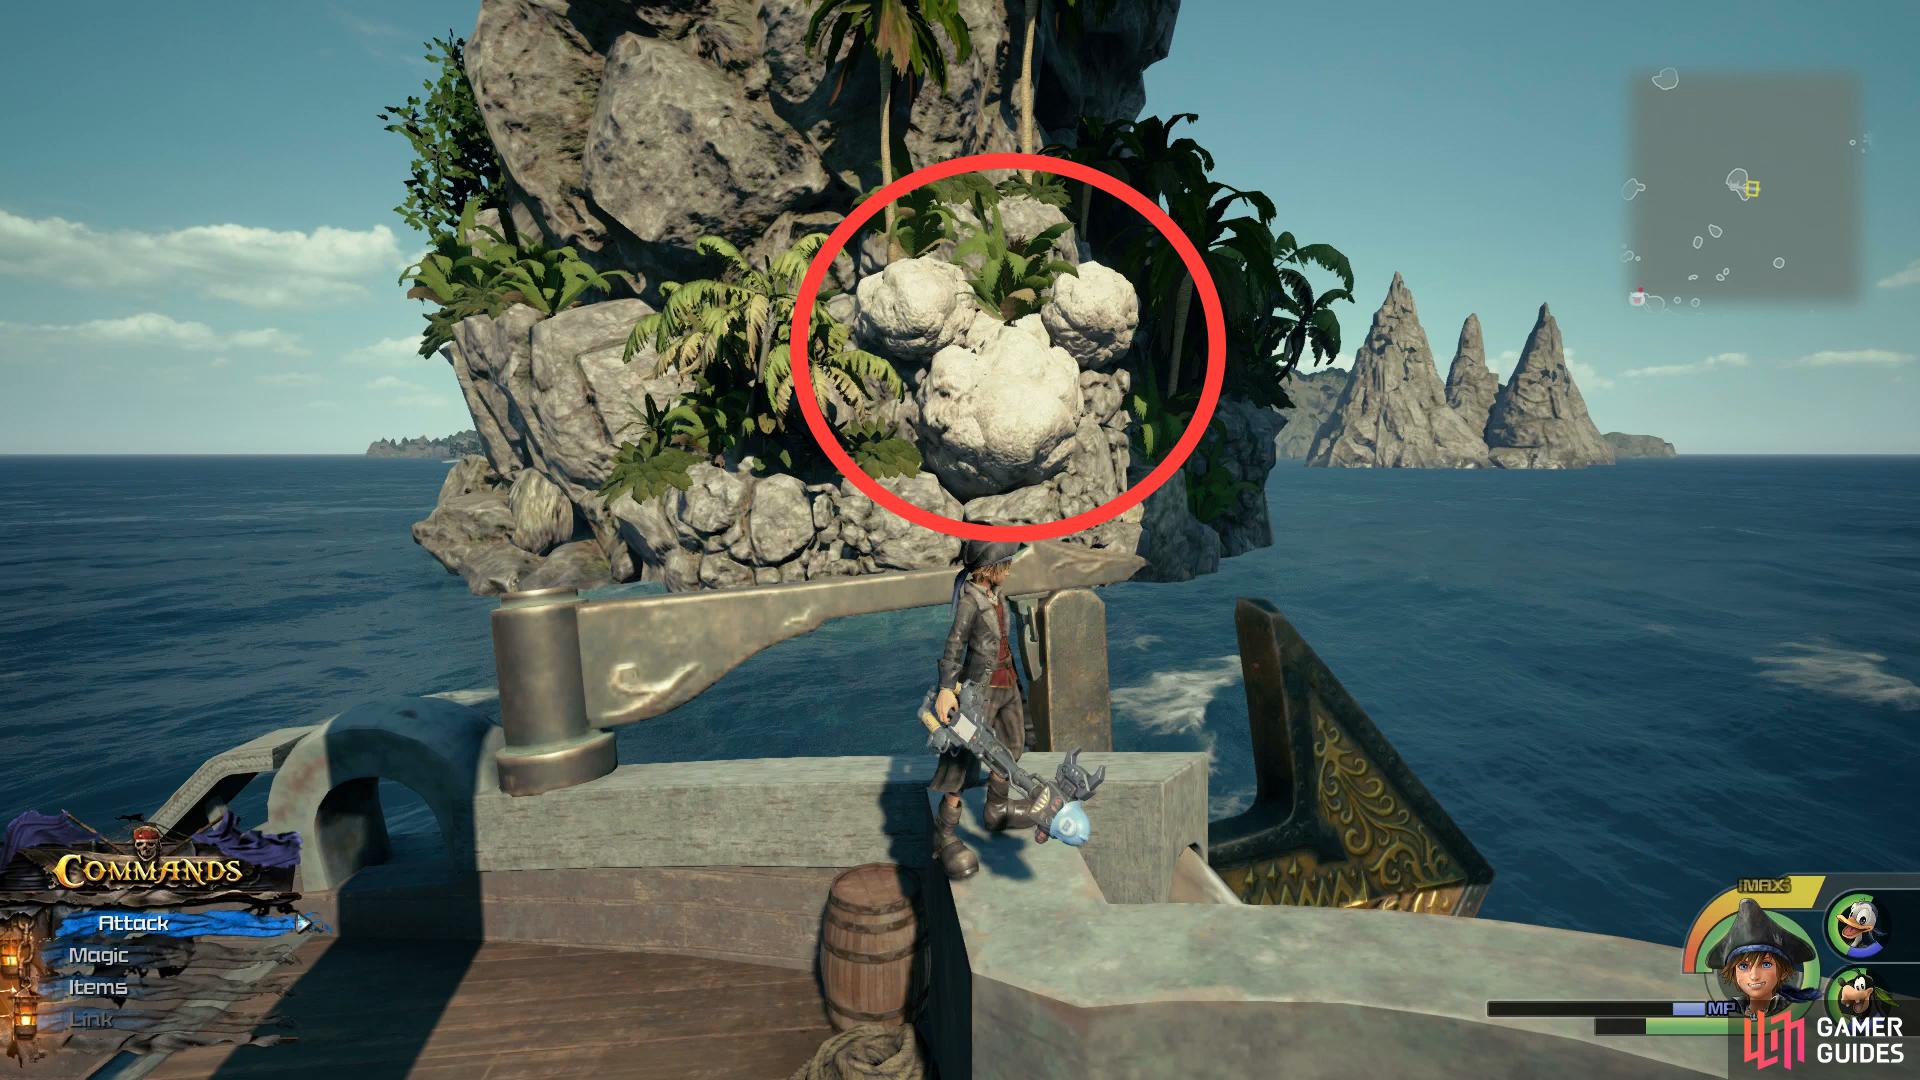 Sail under the archway of Horeshoe Island to find this Lucky Emblem